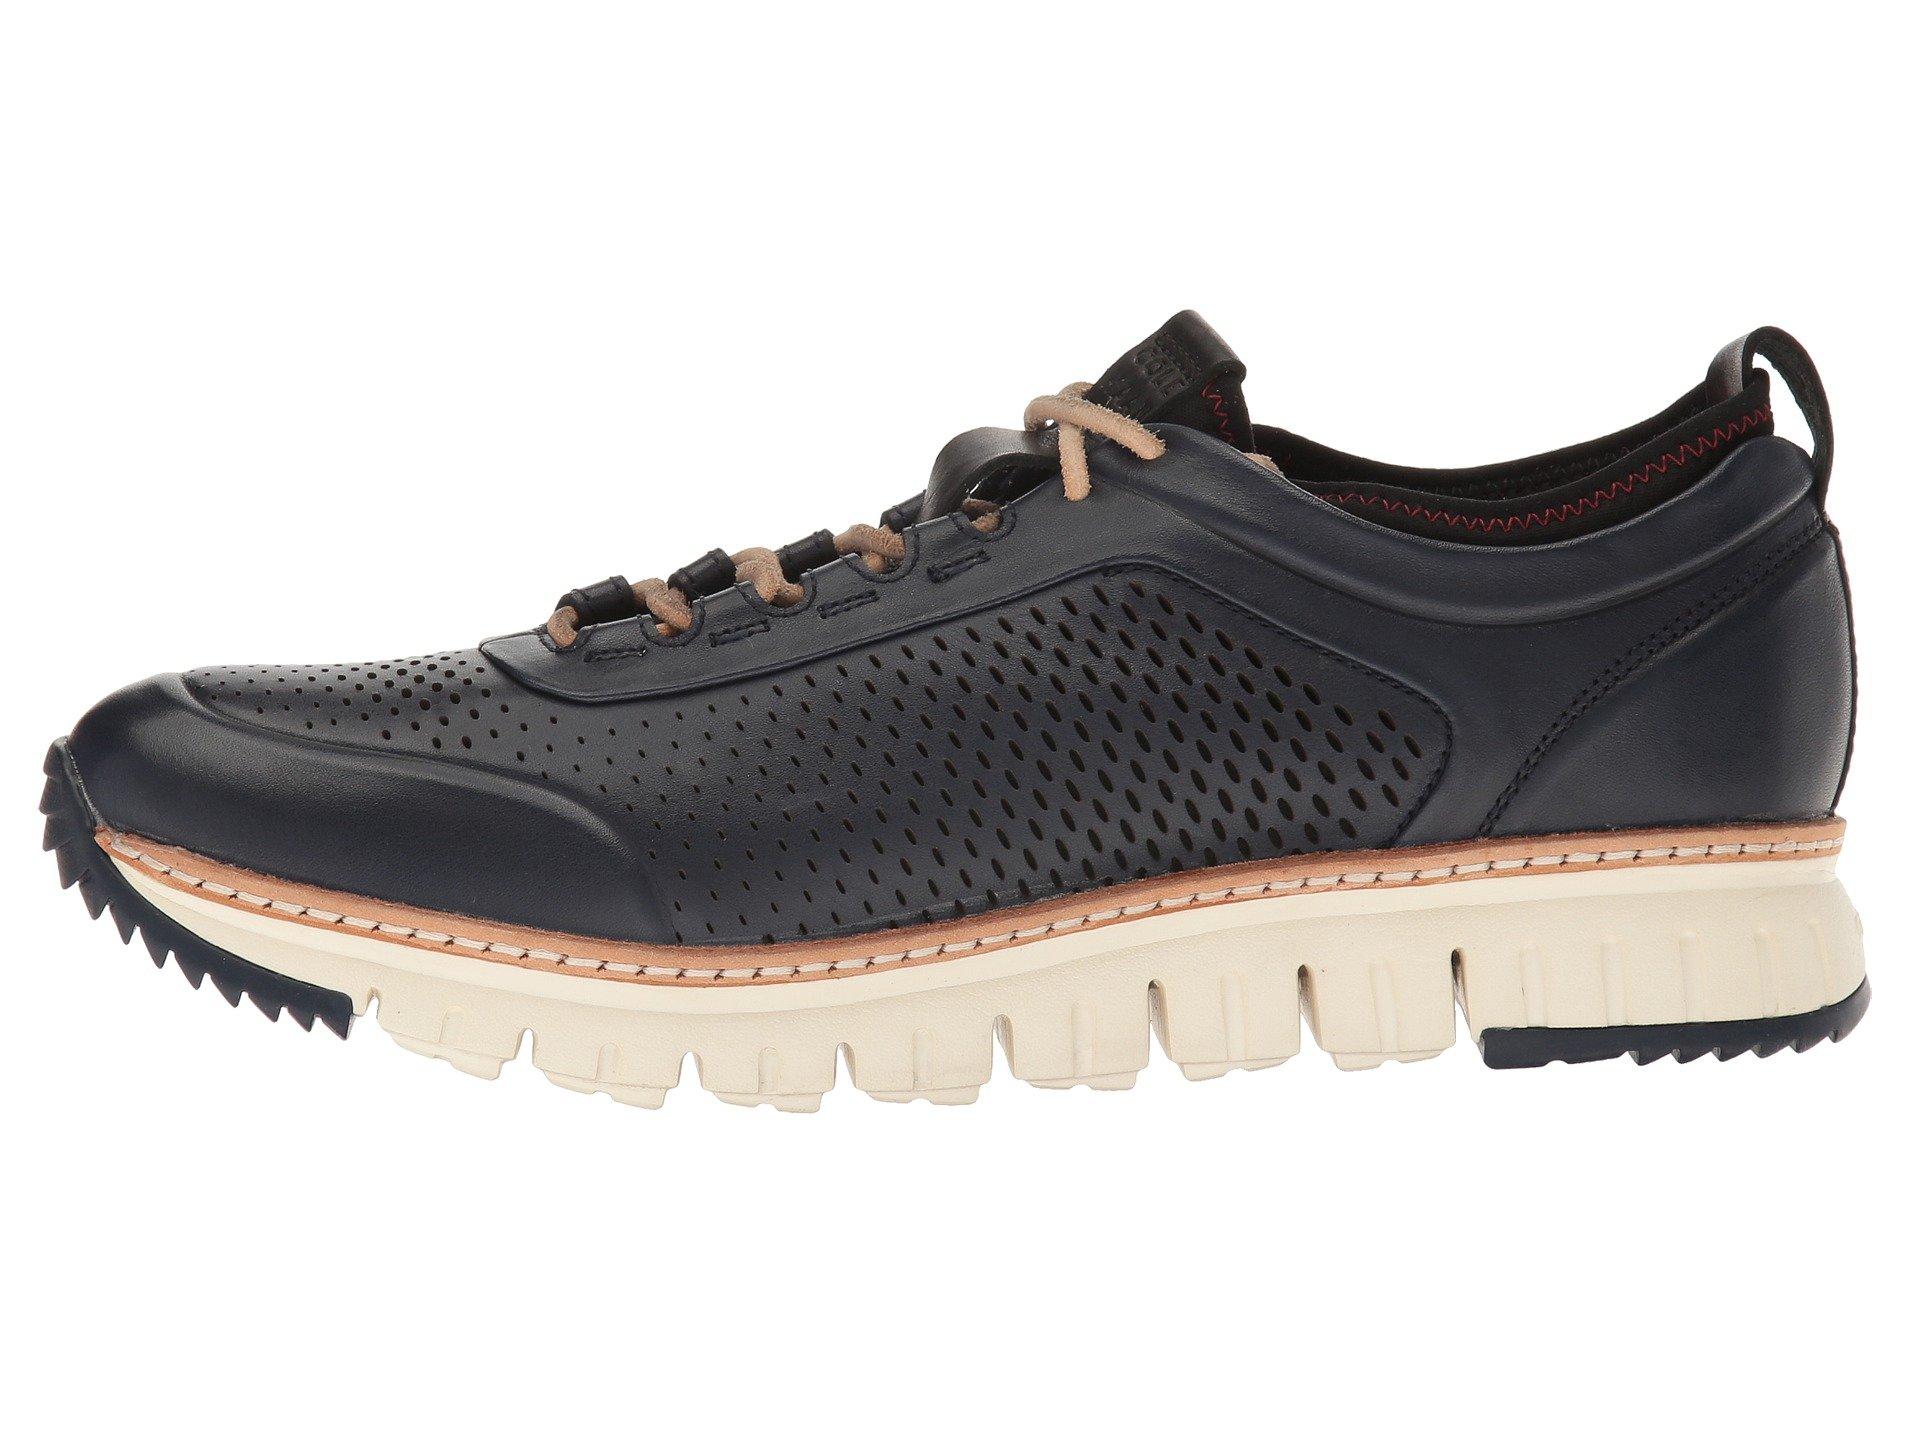 Lyst - Cole Haan Zerogrand Perforated Sneakers for Men